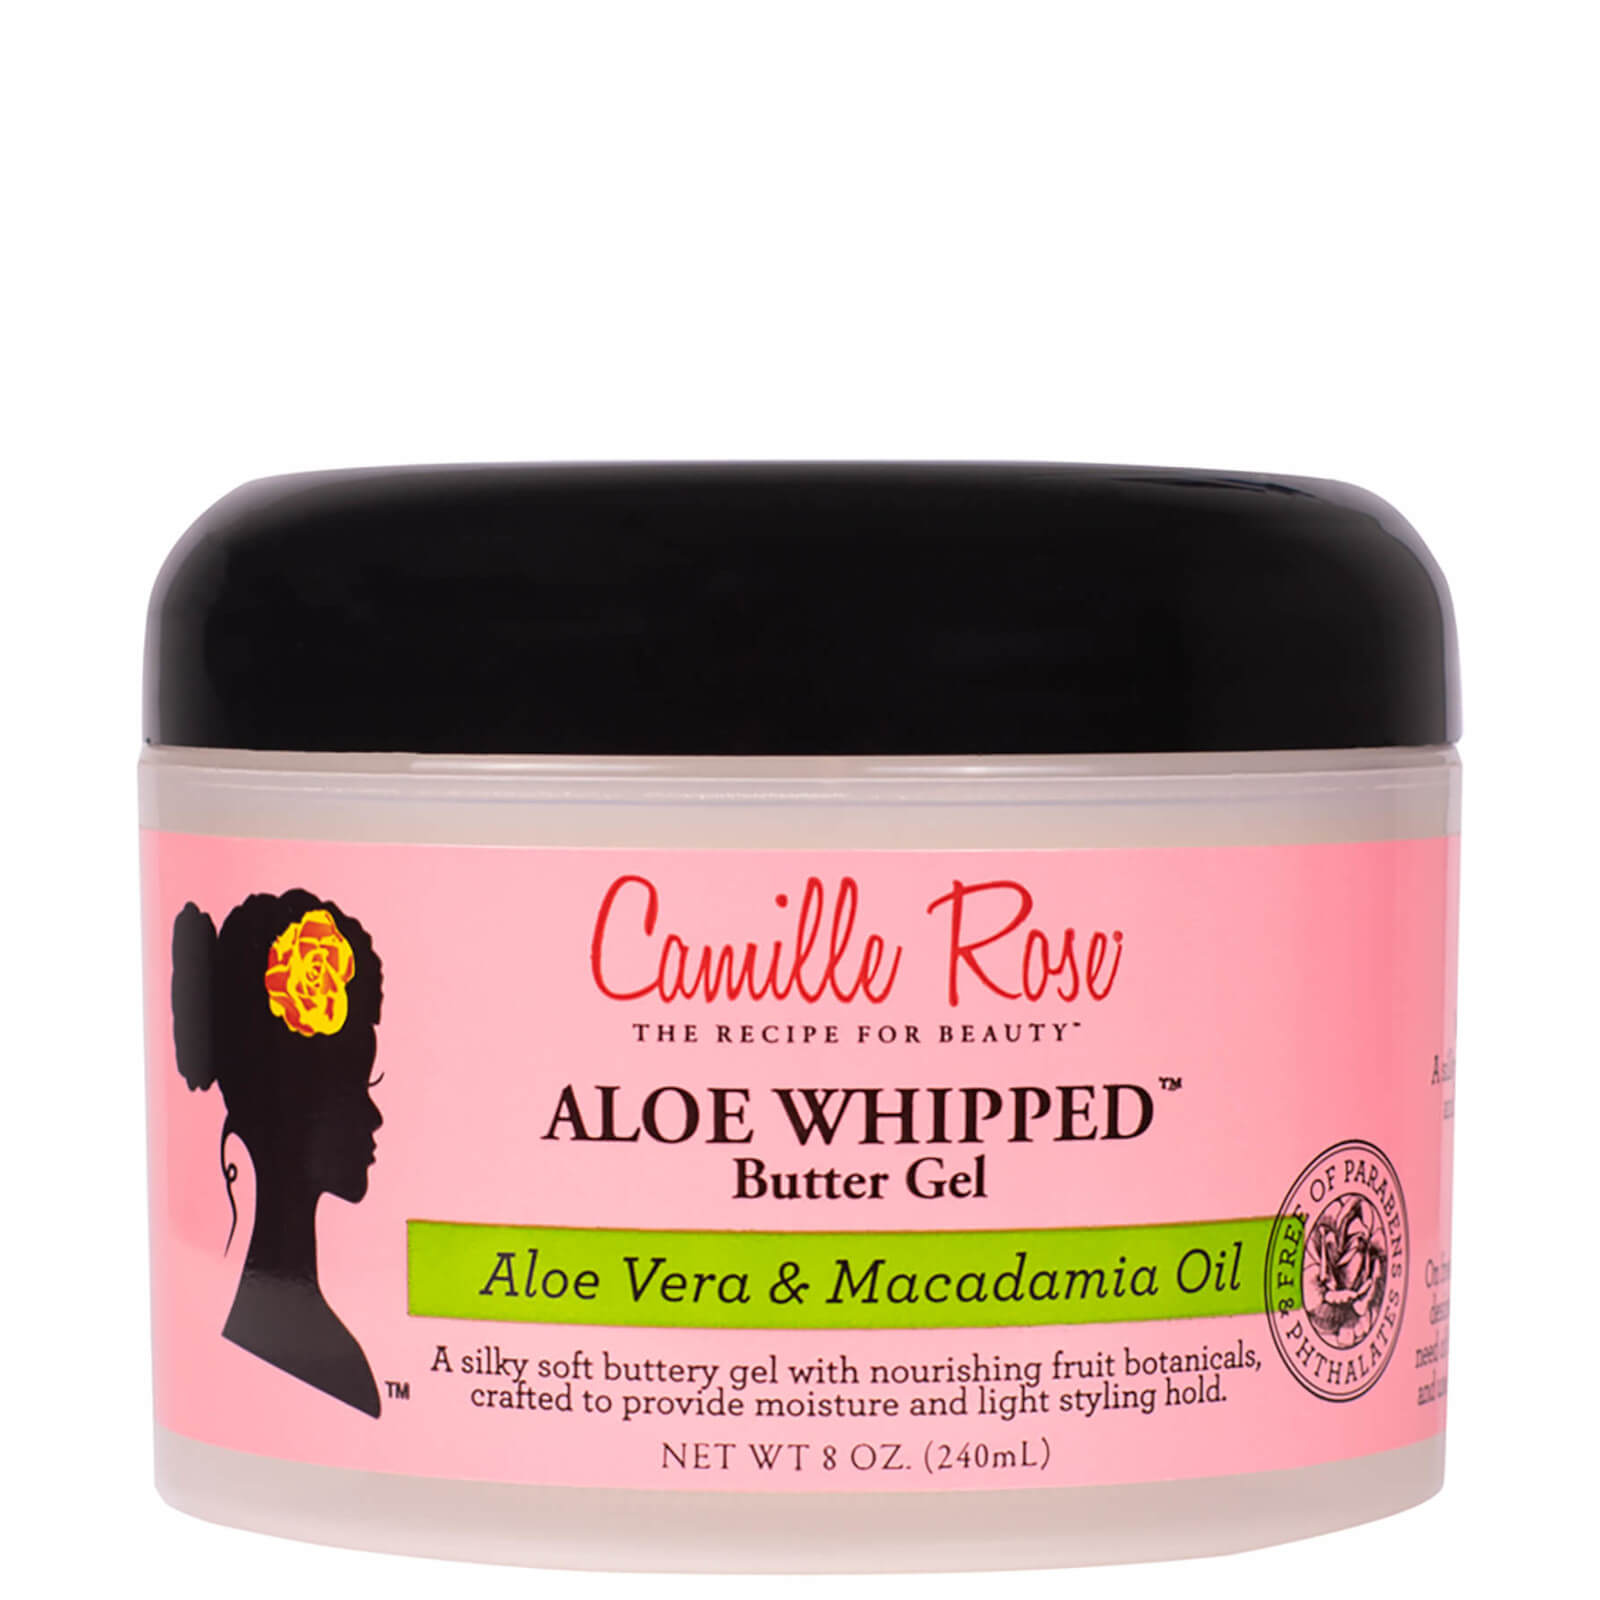 Image of Camille Rose Aloe Whipped Butter Gel 240ml